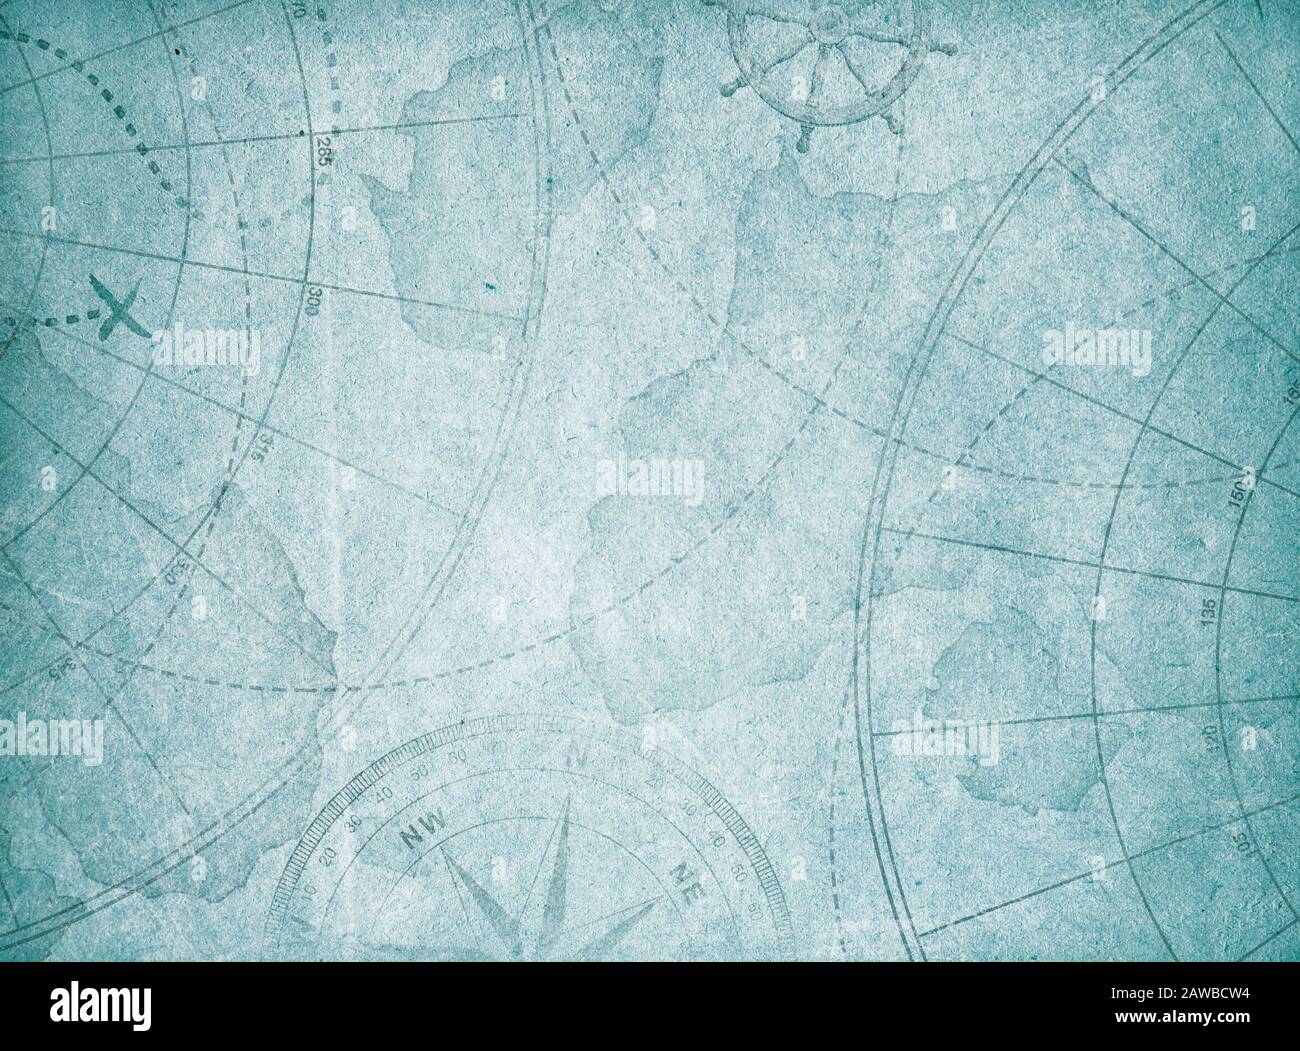 Vintage blue abstract map retro background Stock Photo